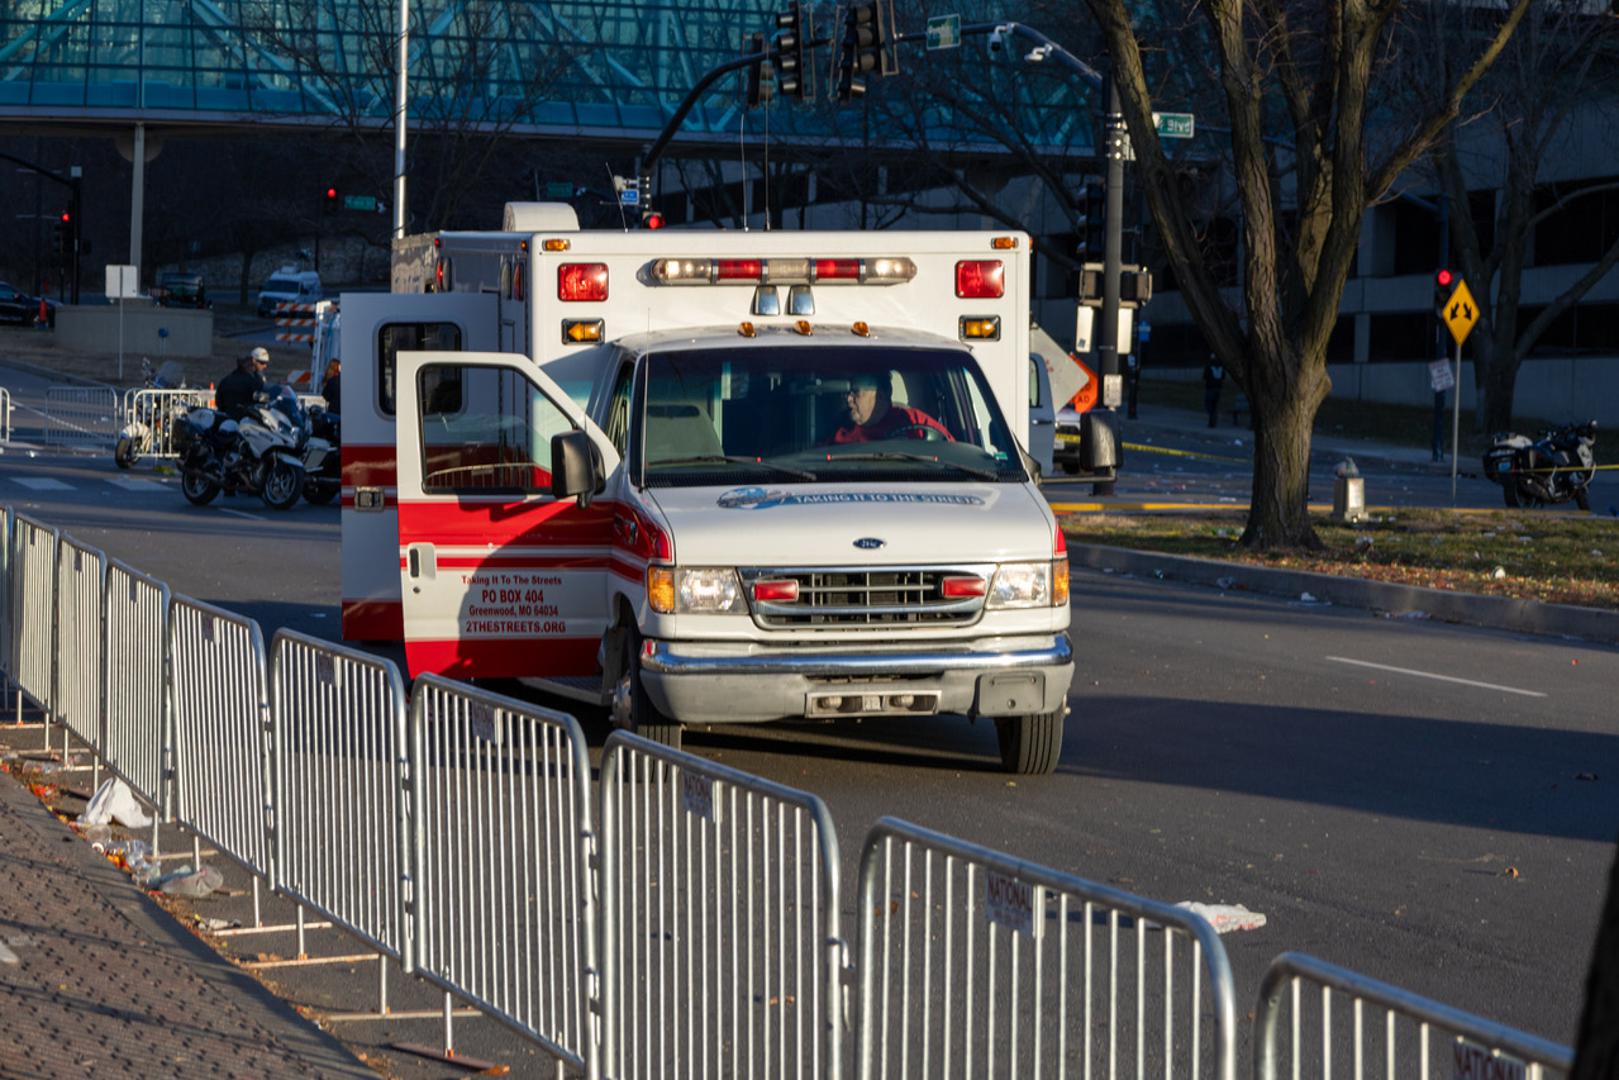 (240215) -- KANSAS CITY, Feb. 15, 2024 (Xinhua) -- This photo taken on Feb. 14, 2024 shows an ambulance waiting at the site following a shooting in Kansas City, Missouri, the United States. At least one person was killed and 22 were injured as gunfire erupted during the Kansas City Chiefs' Super Bowl victory parade in Kansas City, U.S. state of Missouri, Stacey Graves, chief of the Kansas City Missouri Police Department, said at a news conference on Wednesday afternoon. (Photo by Robert Reed/Xinhua) Photo: Robert Reed/XINHUA